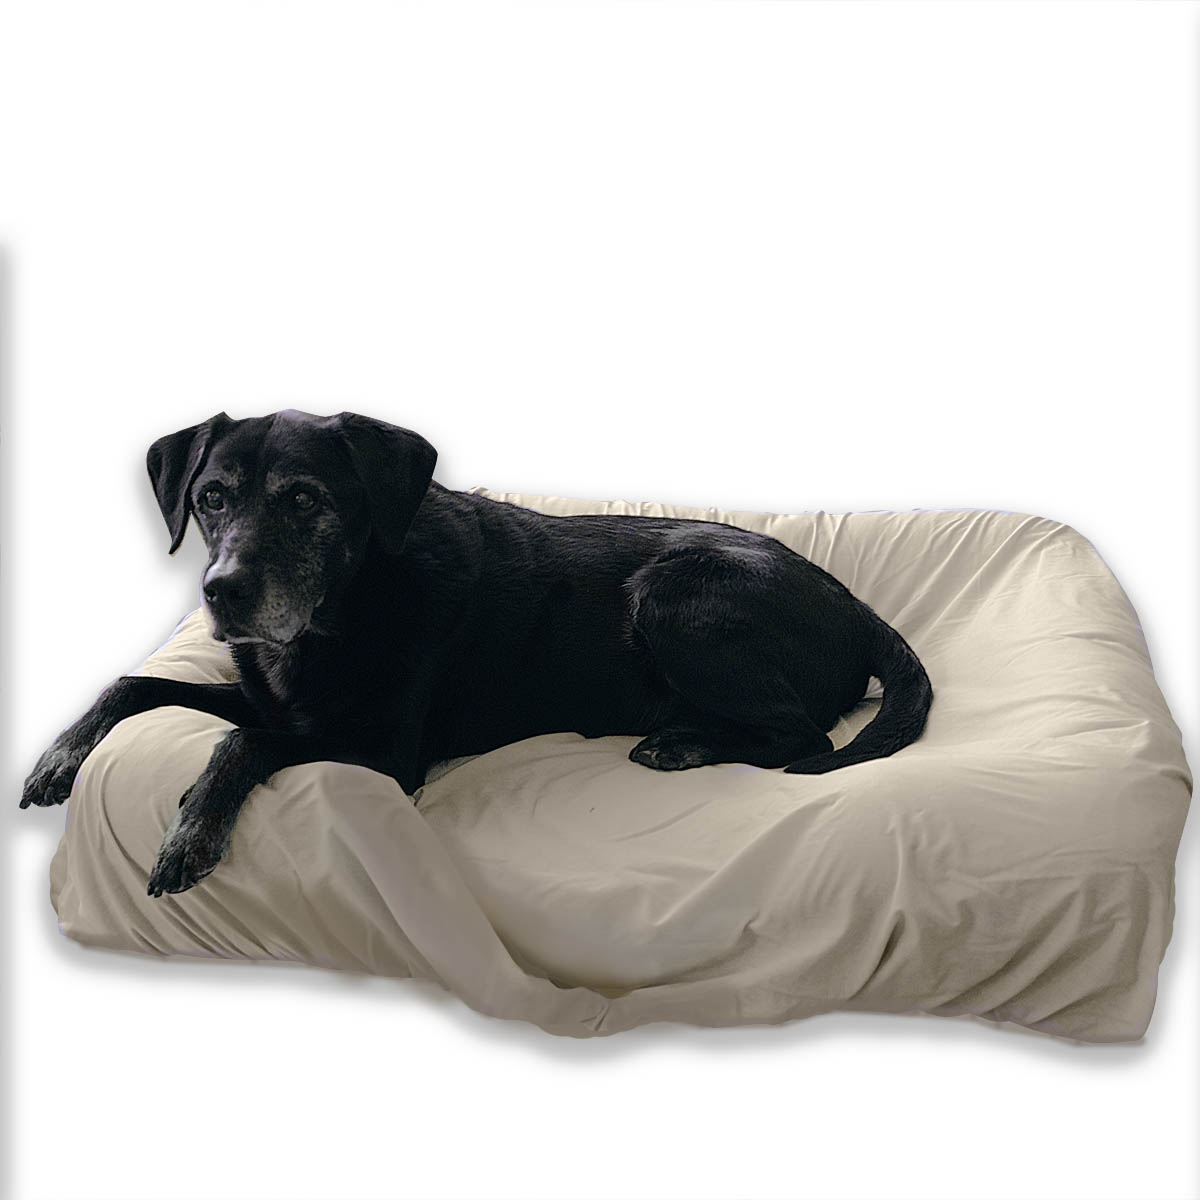 PawSheets® Dog Bed Covers